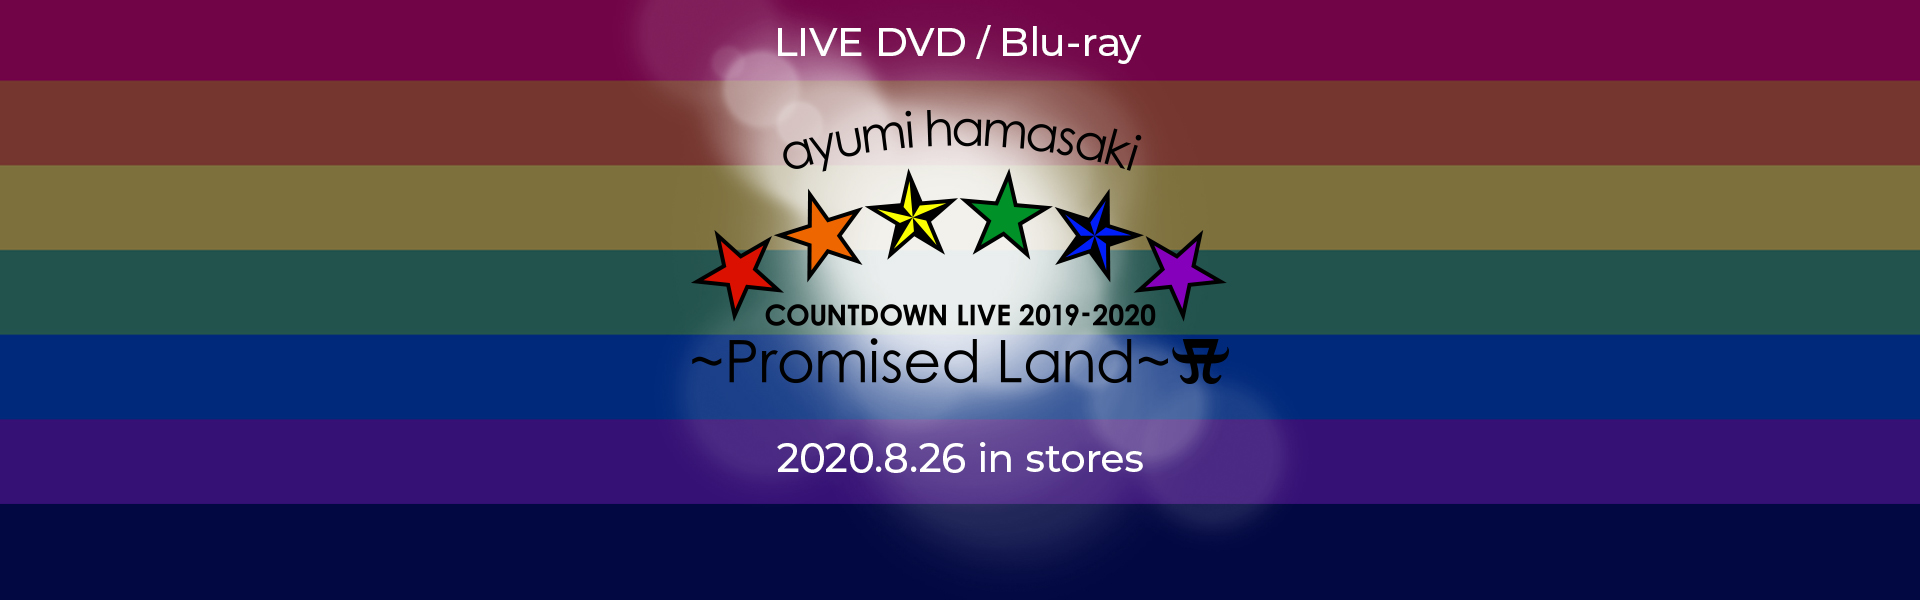 LIVE DVD / Blu-ray『ayumi hamasaki COUNTDOWNLIVE 2019-2020 ～Promised Land～ A』2020.8.26 in stores